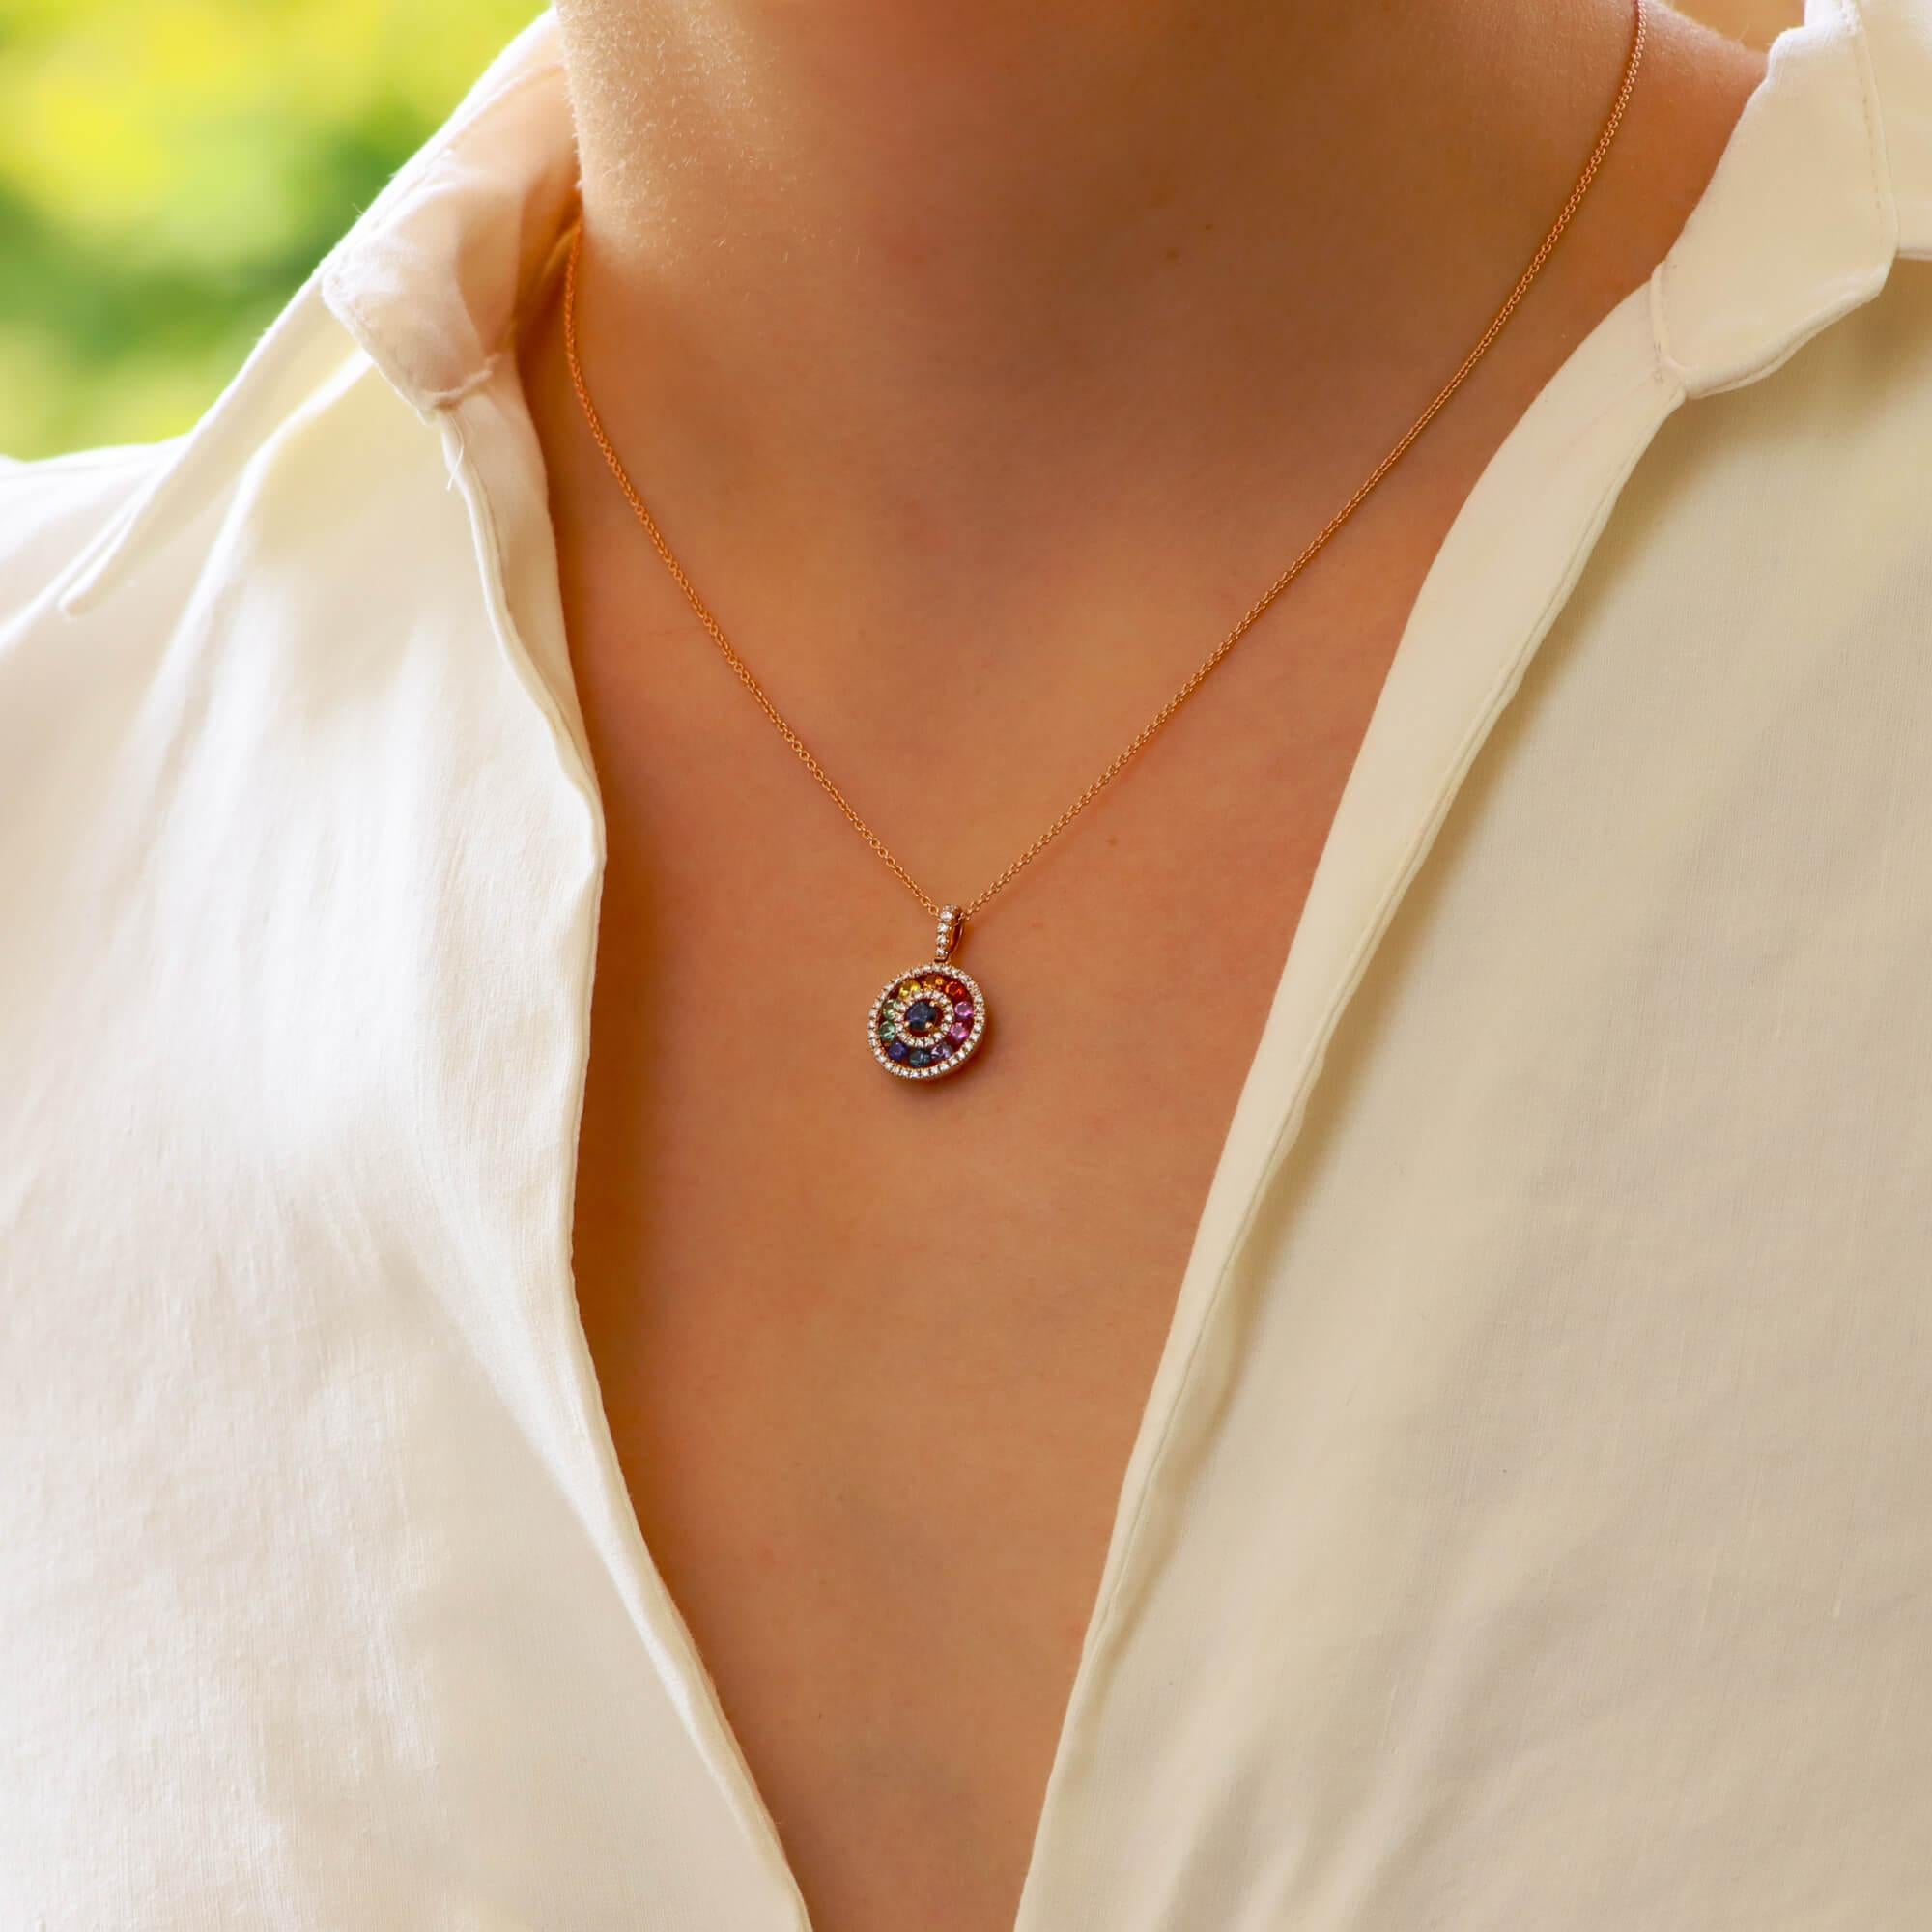 An elegant rainbow sapphire and diamond circle pendant set in 18k rose gold.

The pendant depicts a circle motif, set with a ring of round cut rainbow sapphires. These sapphires are bordered by round brilliant cut diamonds which enhance the